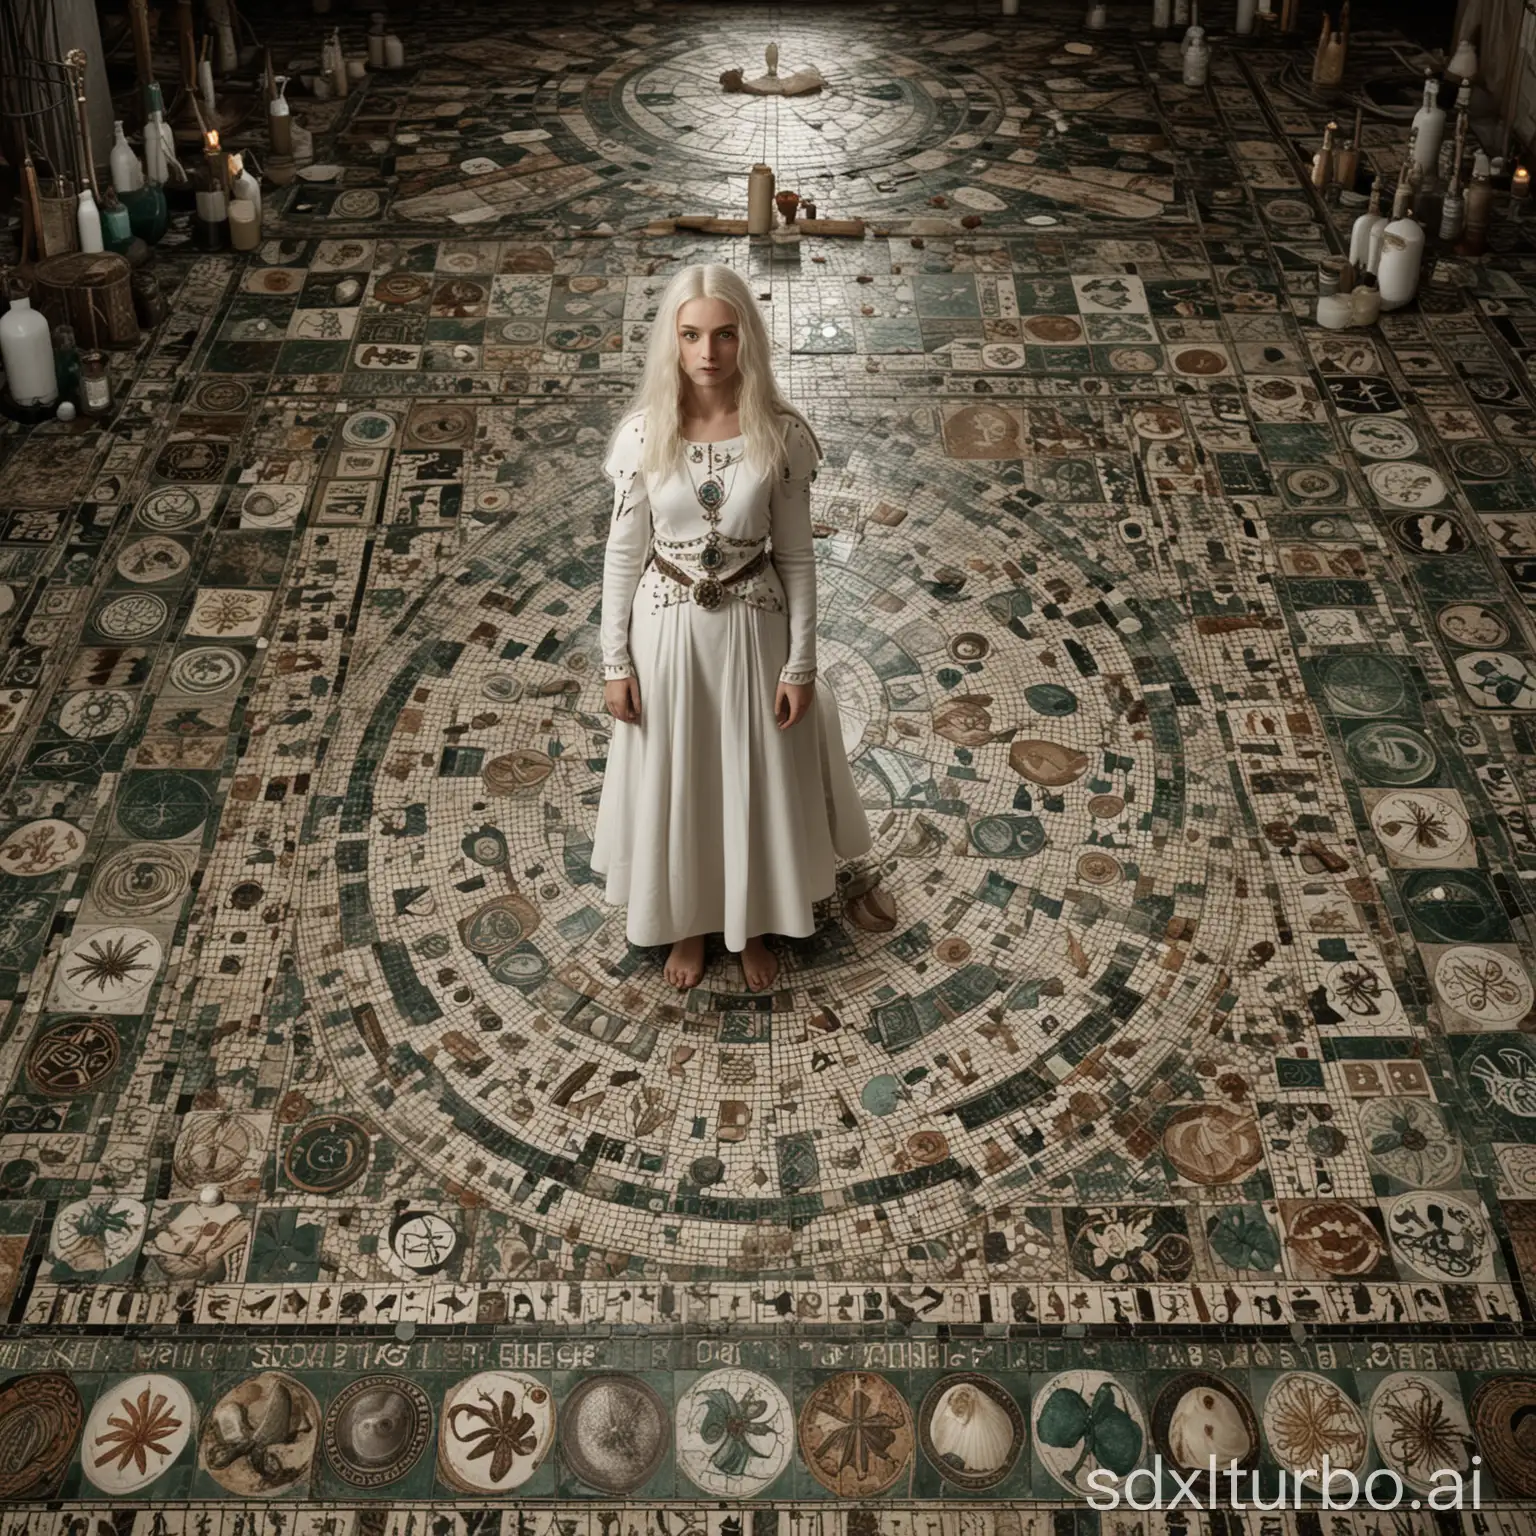 High precision photograph of a vast indoor gothic alchemical laboratory : .9  | mosaic floor with detailed astrological symbols : .9 | seashells and amphoras : 1.0  | a distant female viking shaman with long white hair, wearing a (white adorned tunic with dark green symbols :) 1.0  | flowers in bottles : .6  | chiaroscuro, clear,bright atmosphere | highly detailed background, focus on textures, hyperrealistic, no blur : 1.